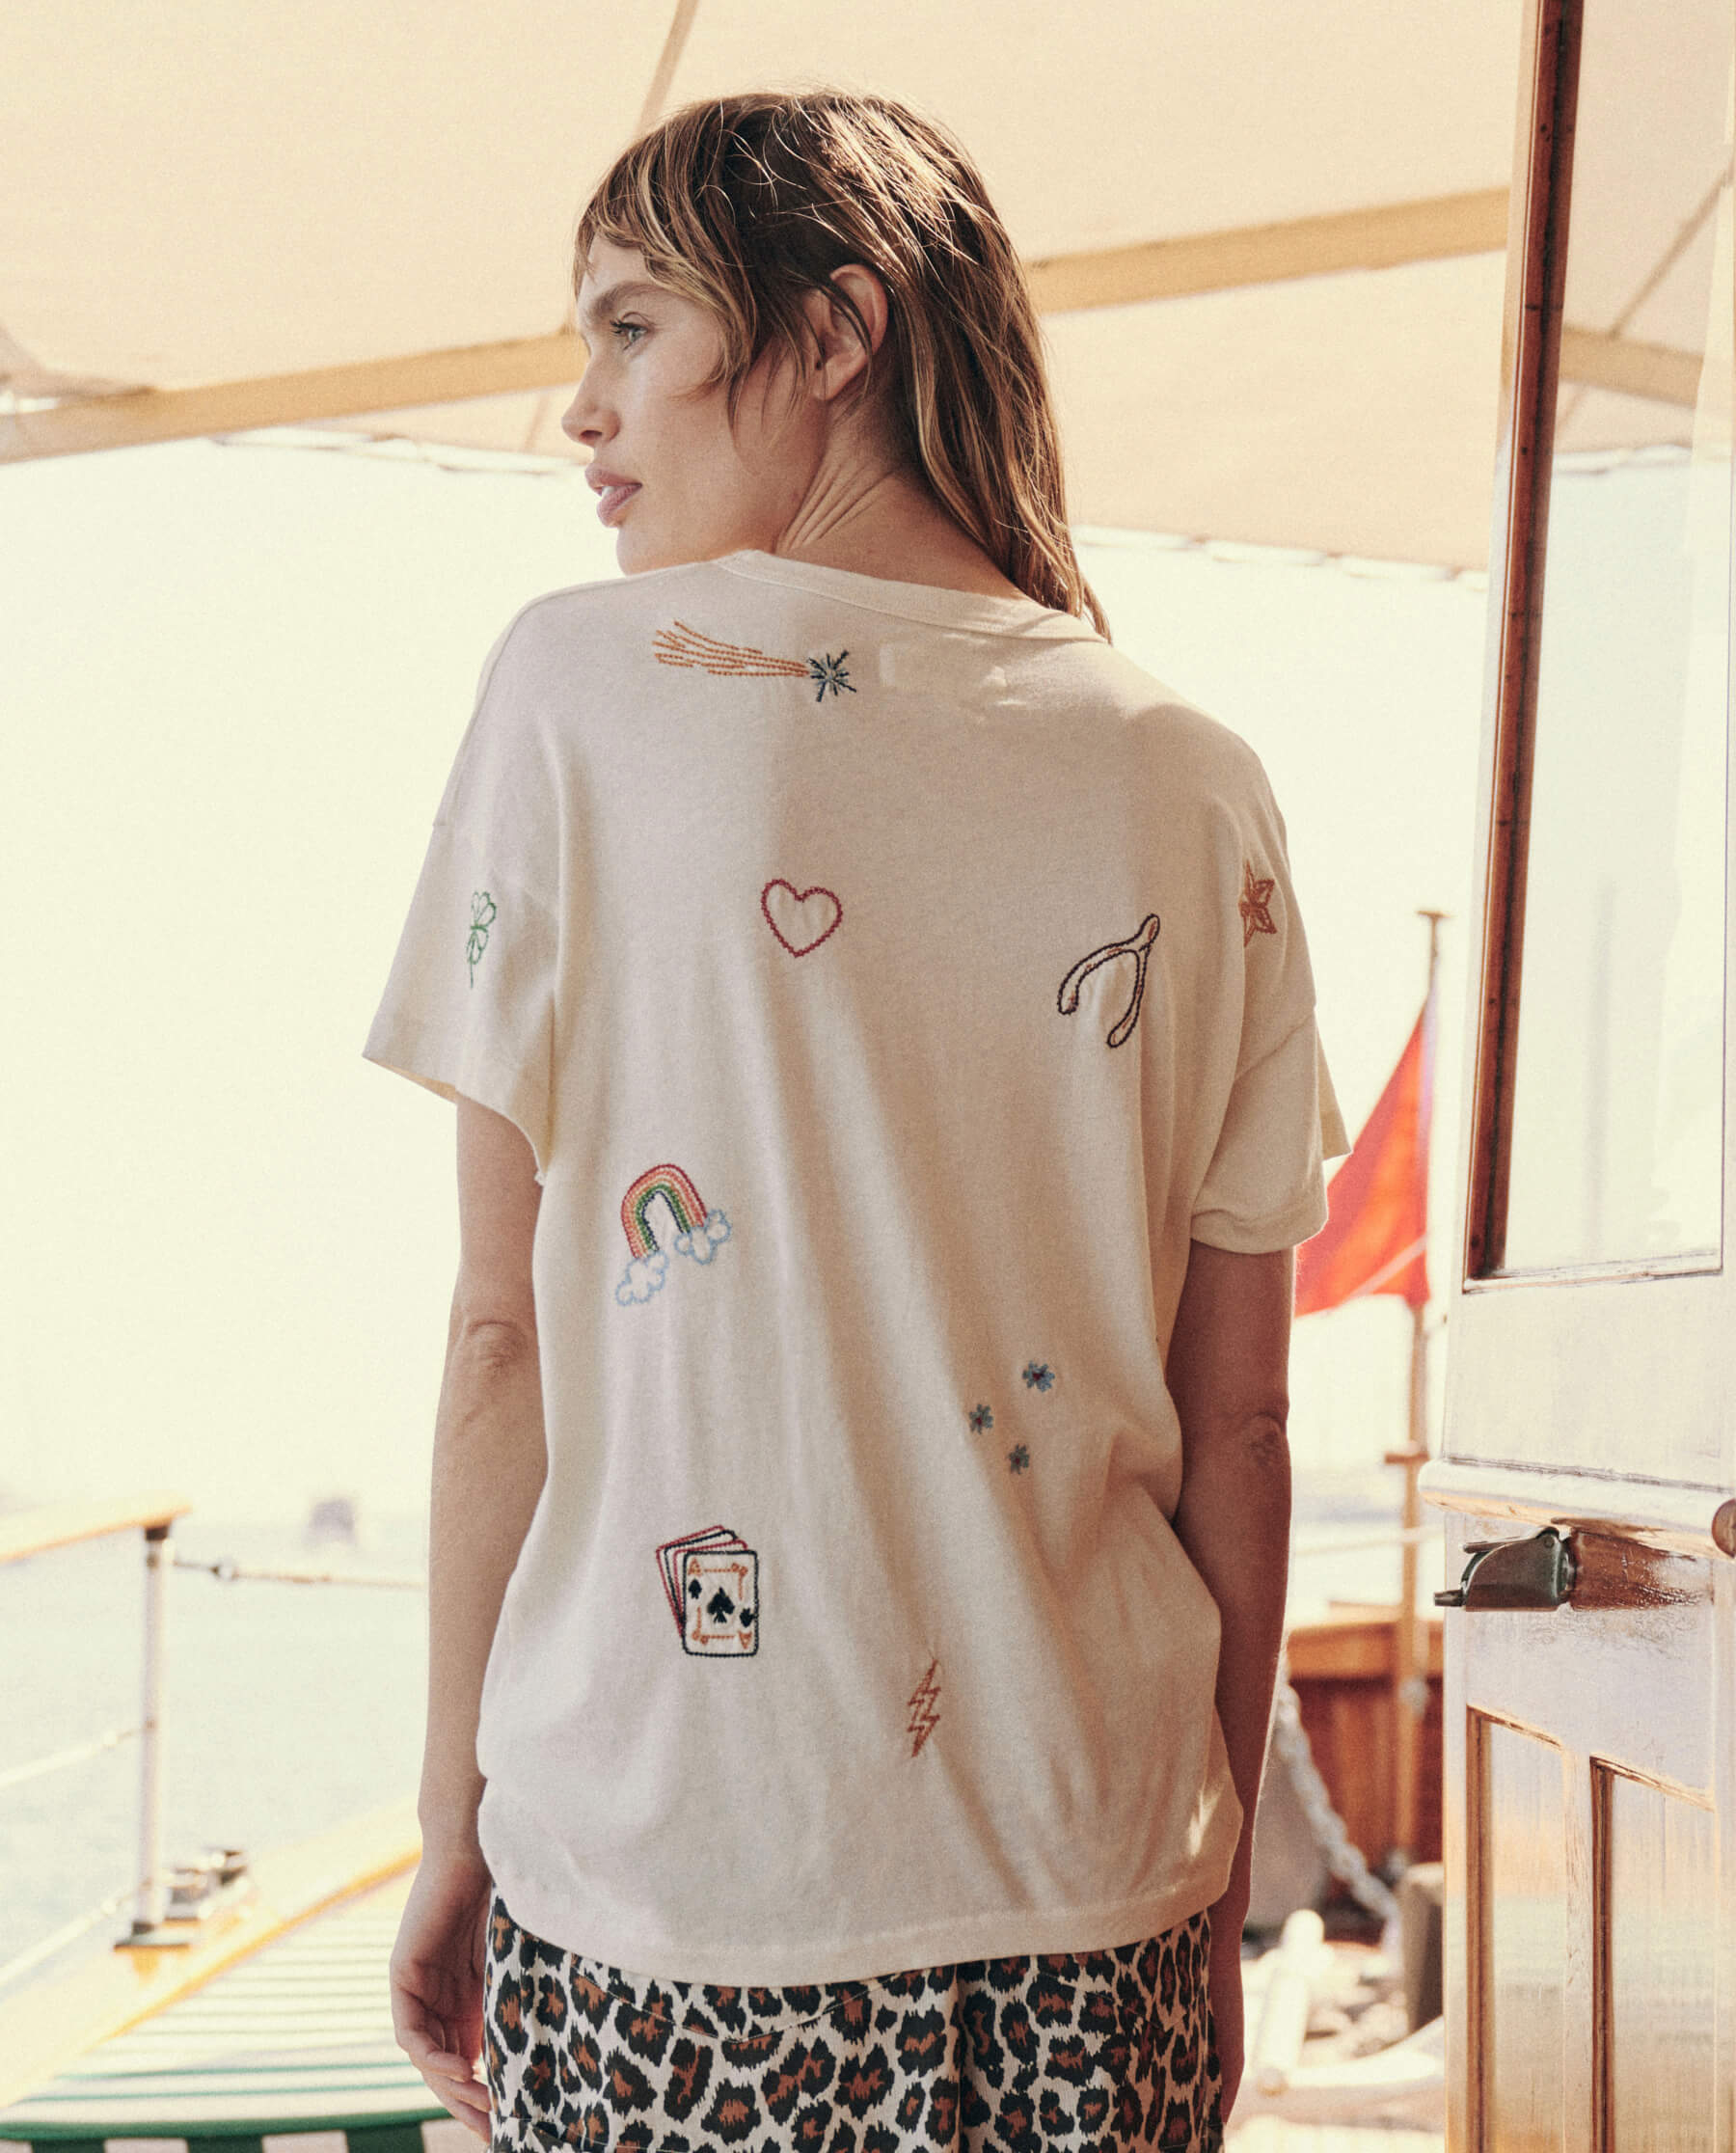 The Boxy Crew. Embroidered -- Washed White with Charm Embroidery TEES THE GREAT. SU24